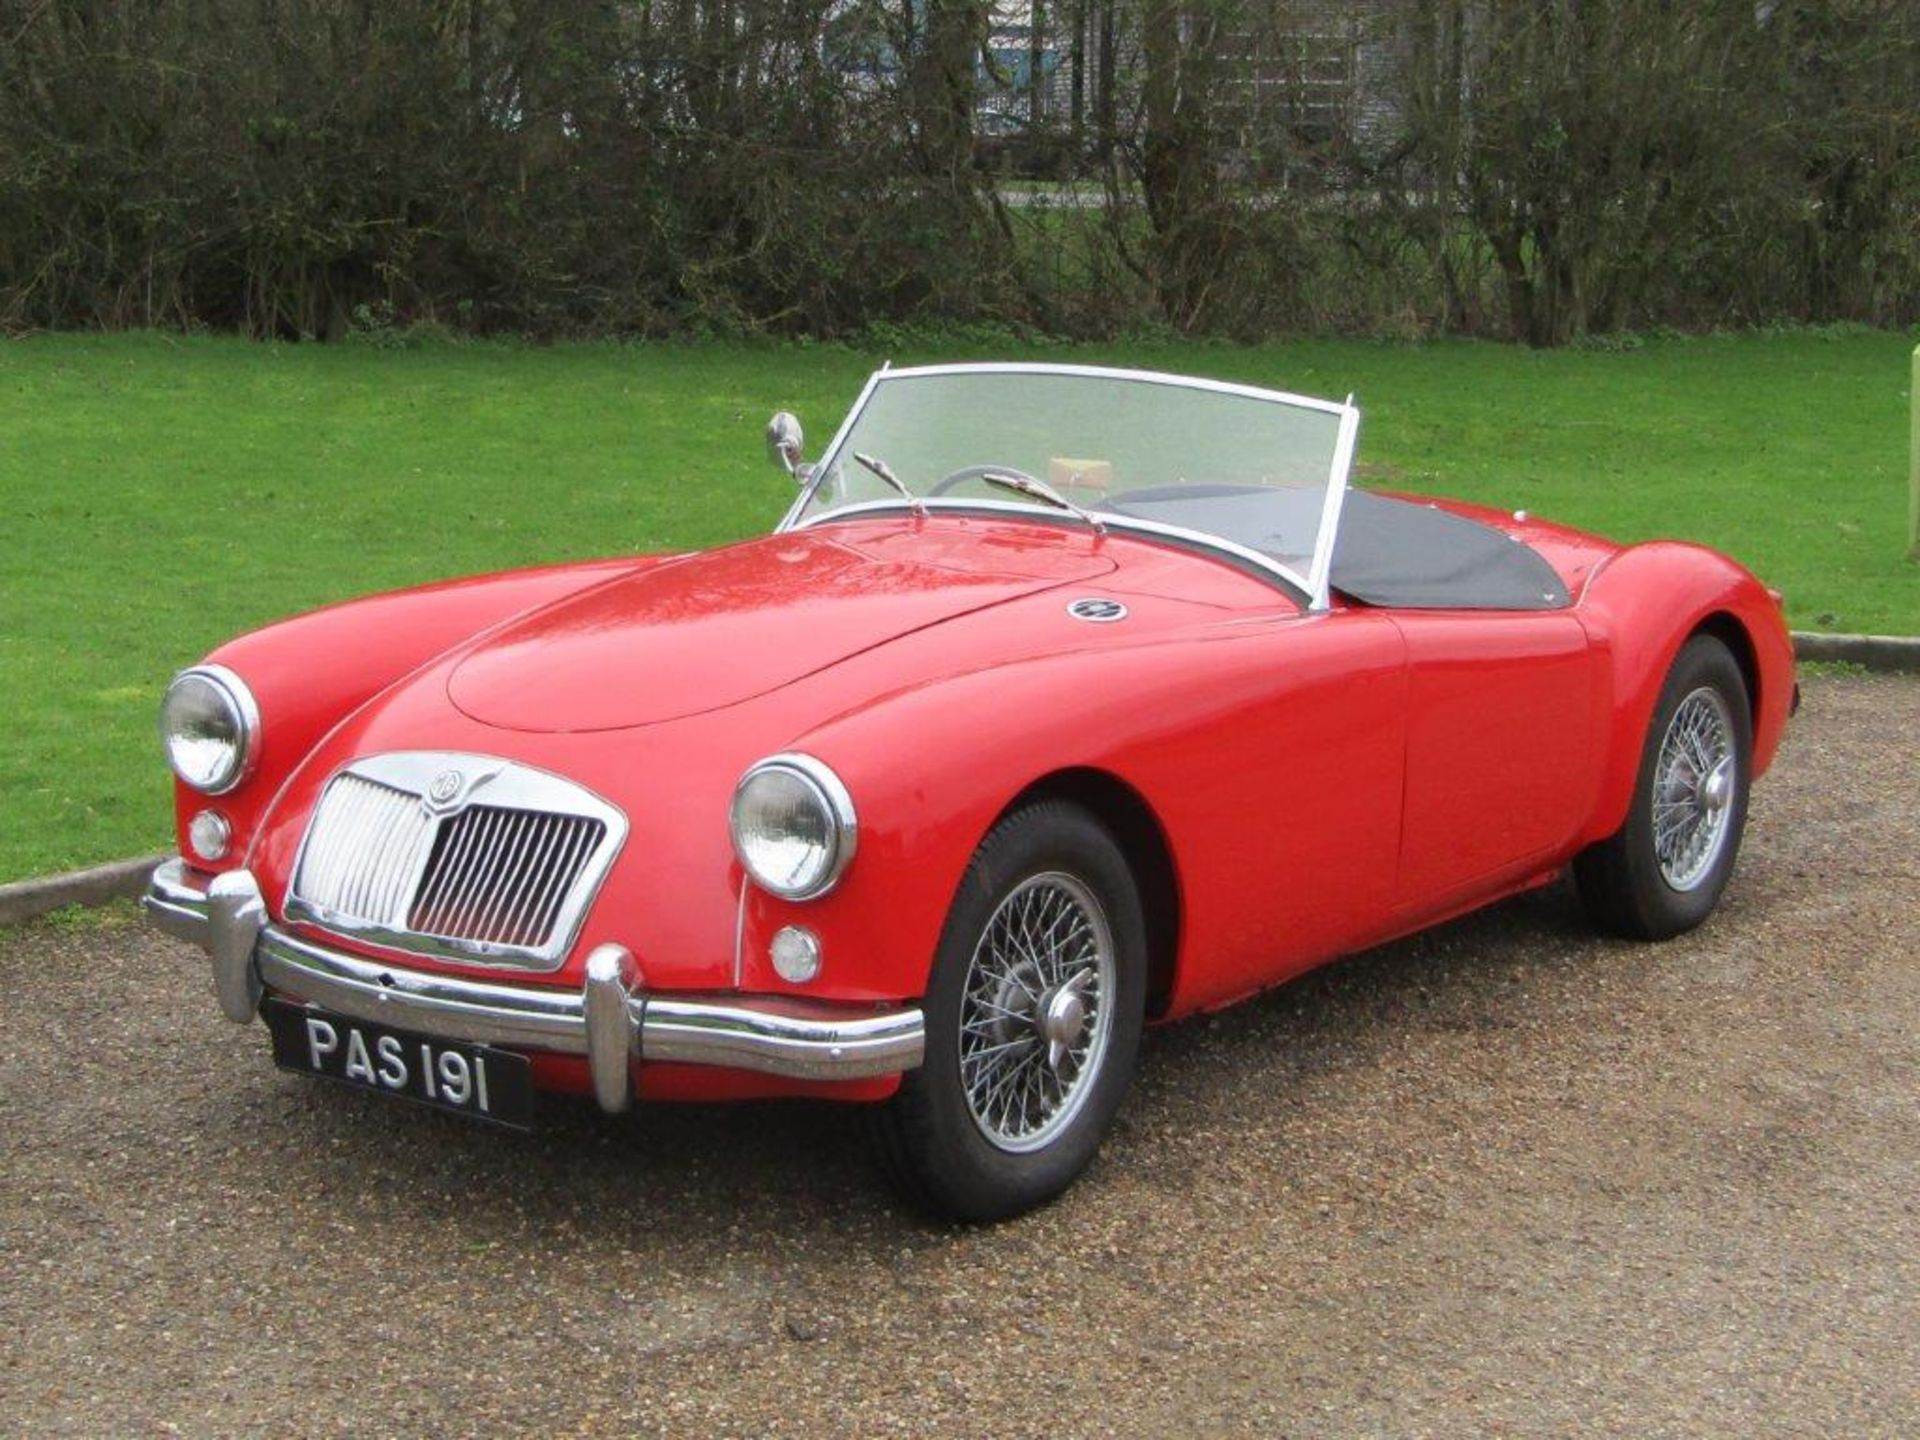 1958 MG A 1500 Roadster - Image 8 of 9